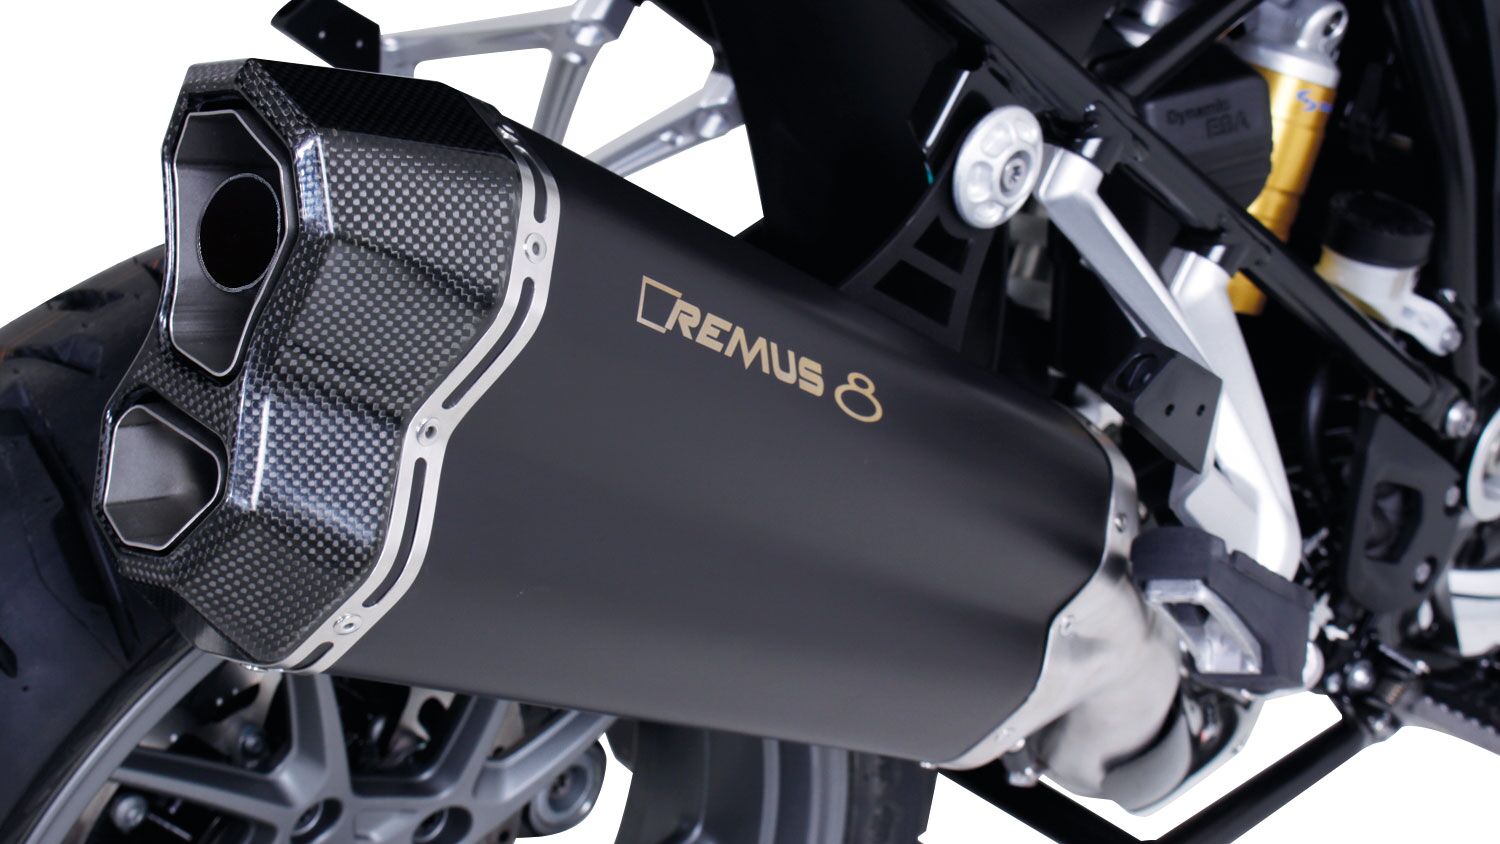 REMUS 8 Slip On Exhaust Stainless Steel - Black - BMW R1200GS/Adventure - Click Image to Close